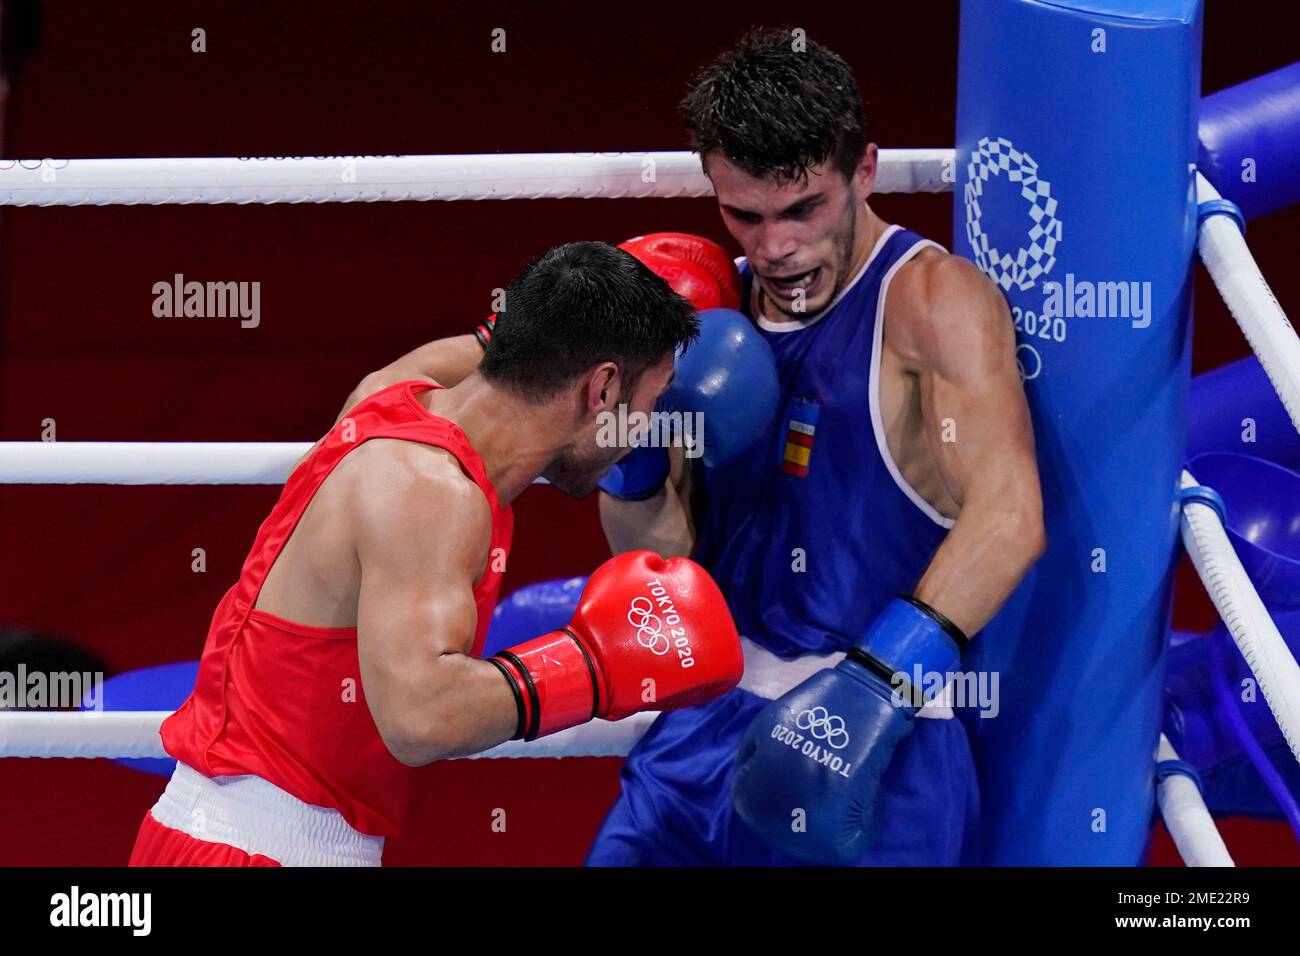 Bulgaria's Daniel Panev Asenov, left, exchanges punches with Spain's  Gabriel Escobar Mascunano during their men's flyweight 52-kg boxing match  at the 2020 Summer Olympics, Saturday, July 31, 2021, in Tokyo, Japan. (AP